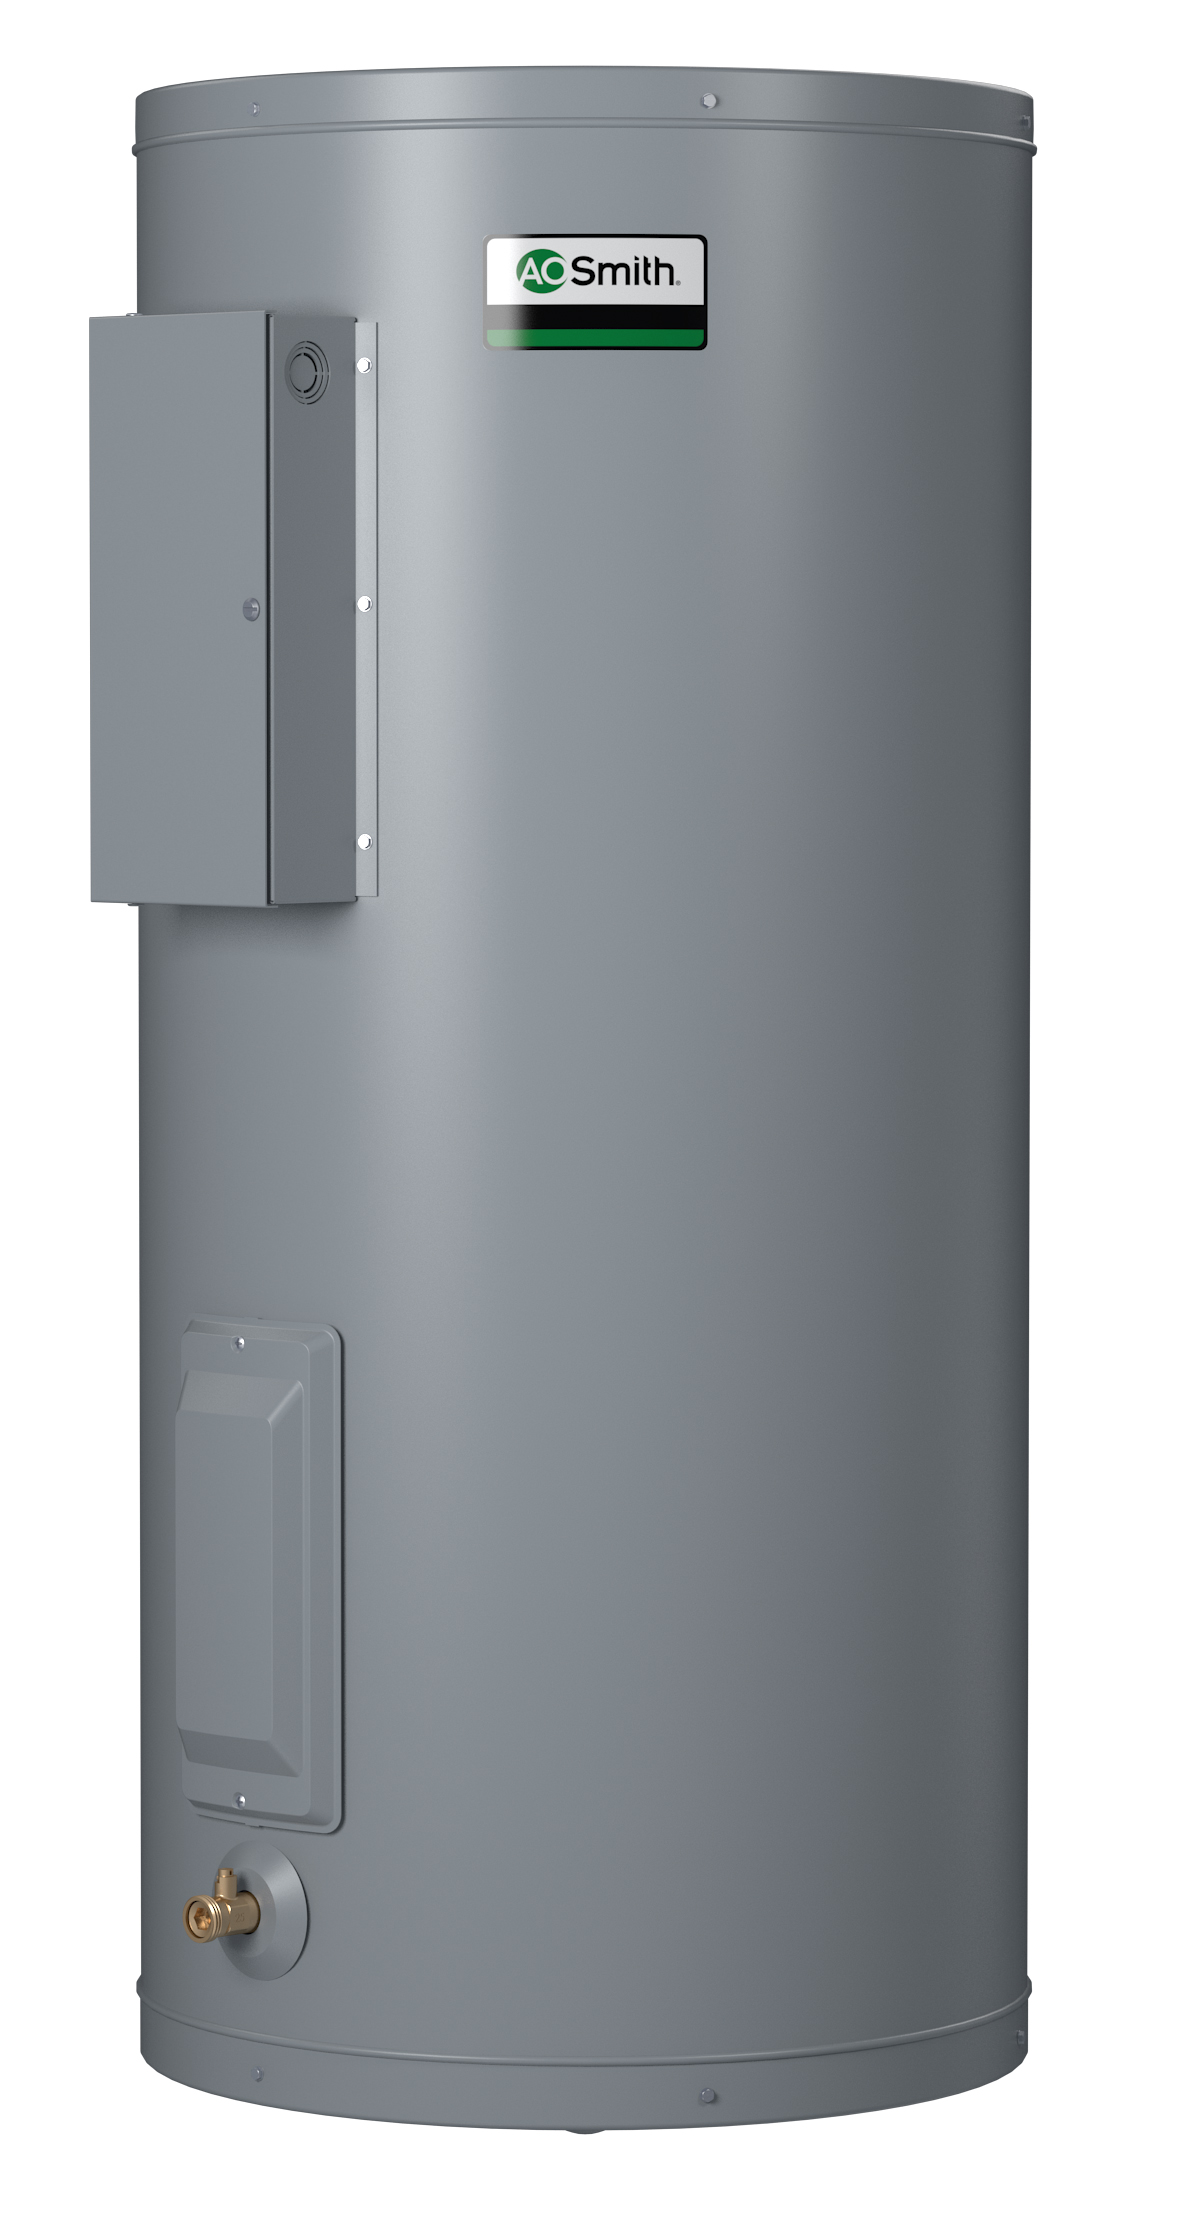 AO SMITH DEN-120D: 120 GALLONS, 2.0KW, 240 VOLT, 3 PHASE, (2-2000 WATT ELEMENTS, NON-SIMULTANEOUS WIRING), DURA-POWER, LIGHT DUTY COMMERCIAL ELECTRIC WATER HEATER